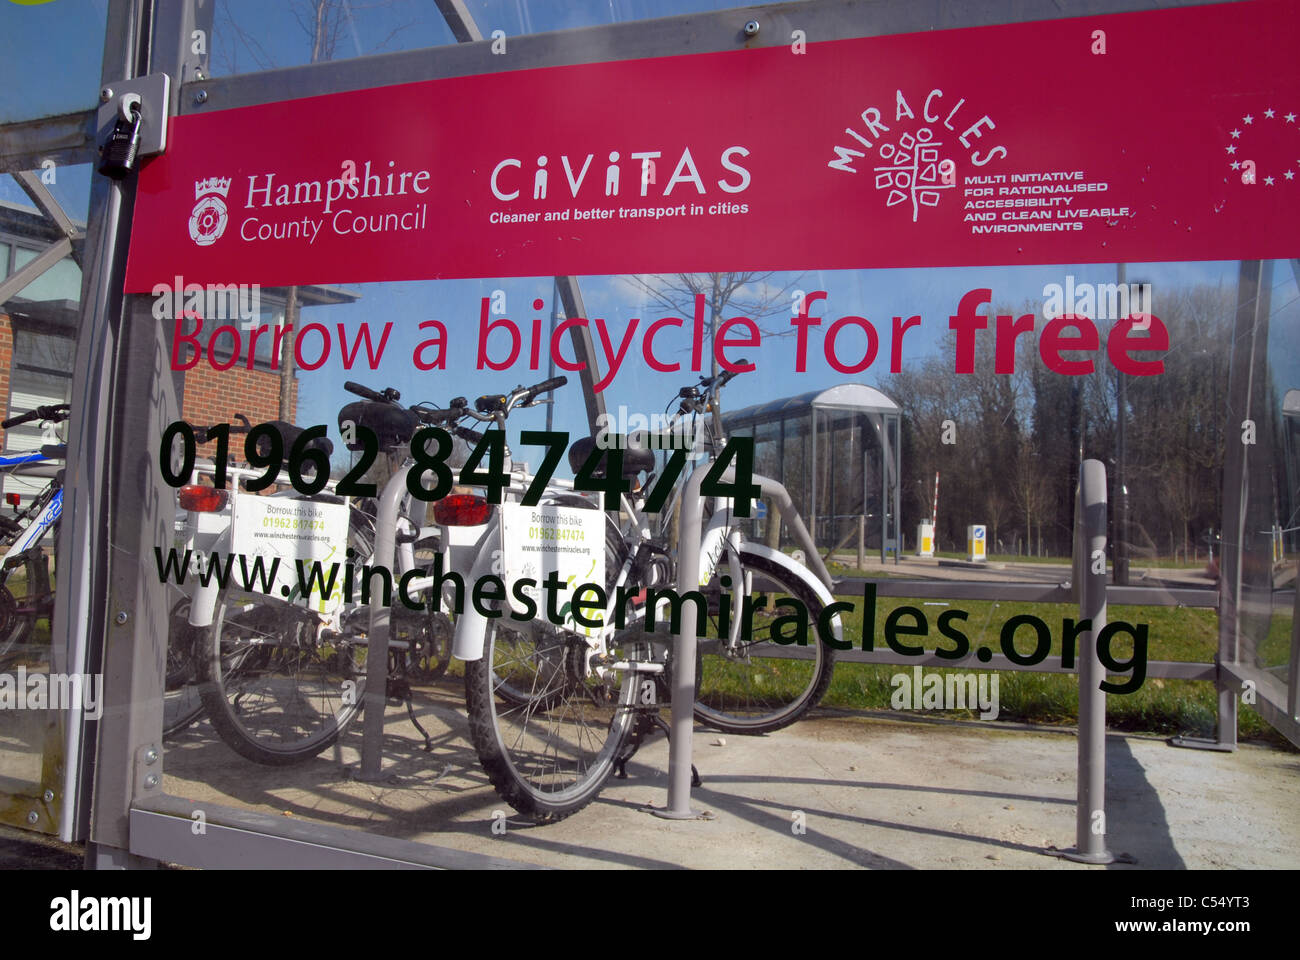 Borrow a bicycle for free scheme at railway station in Winchester, England, UK Stock Photo